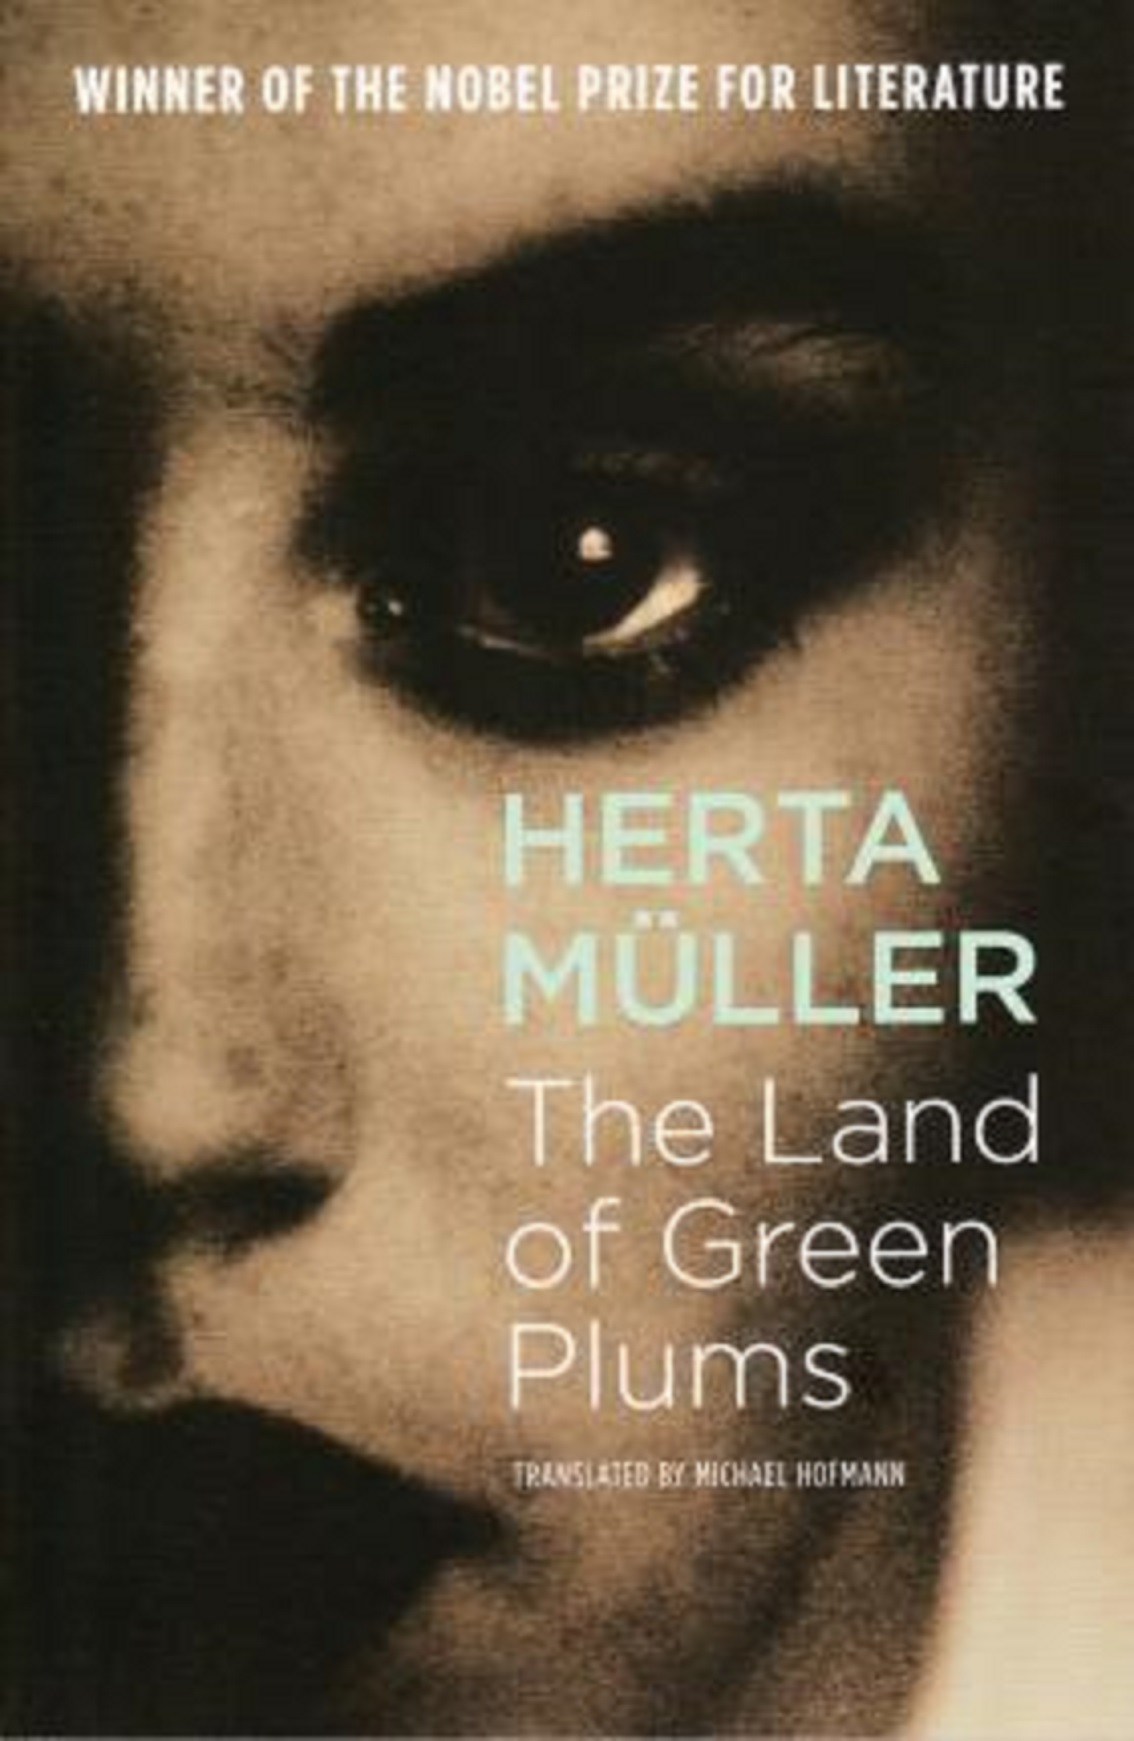 The Land Of Green Plums | Herta Muller